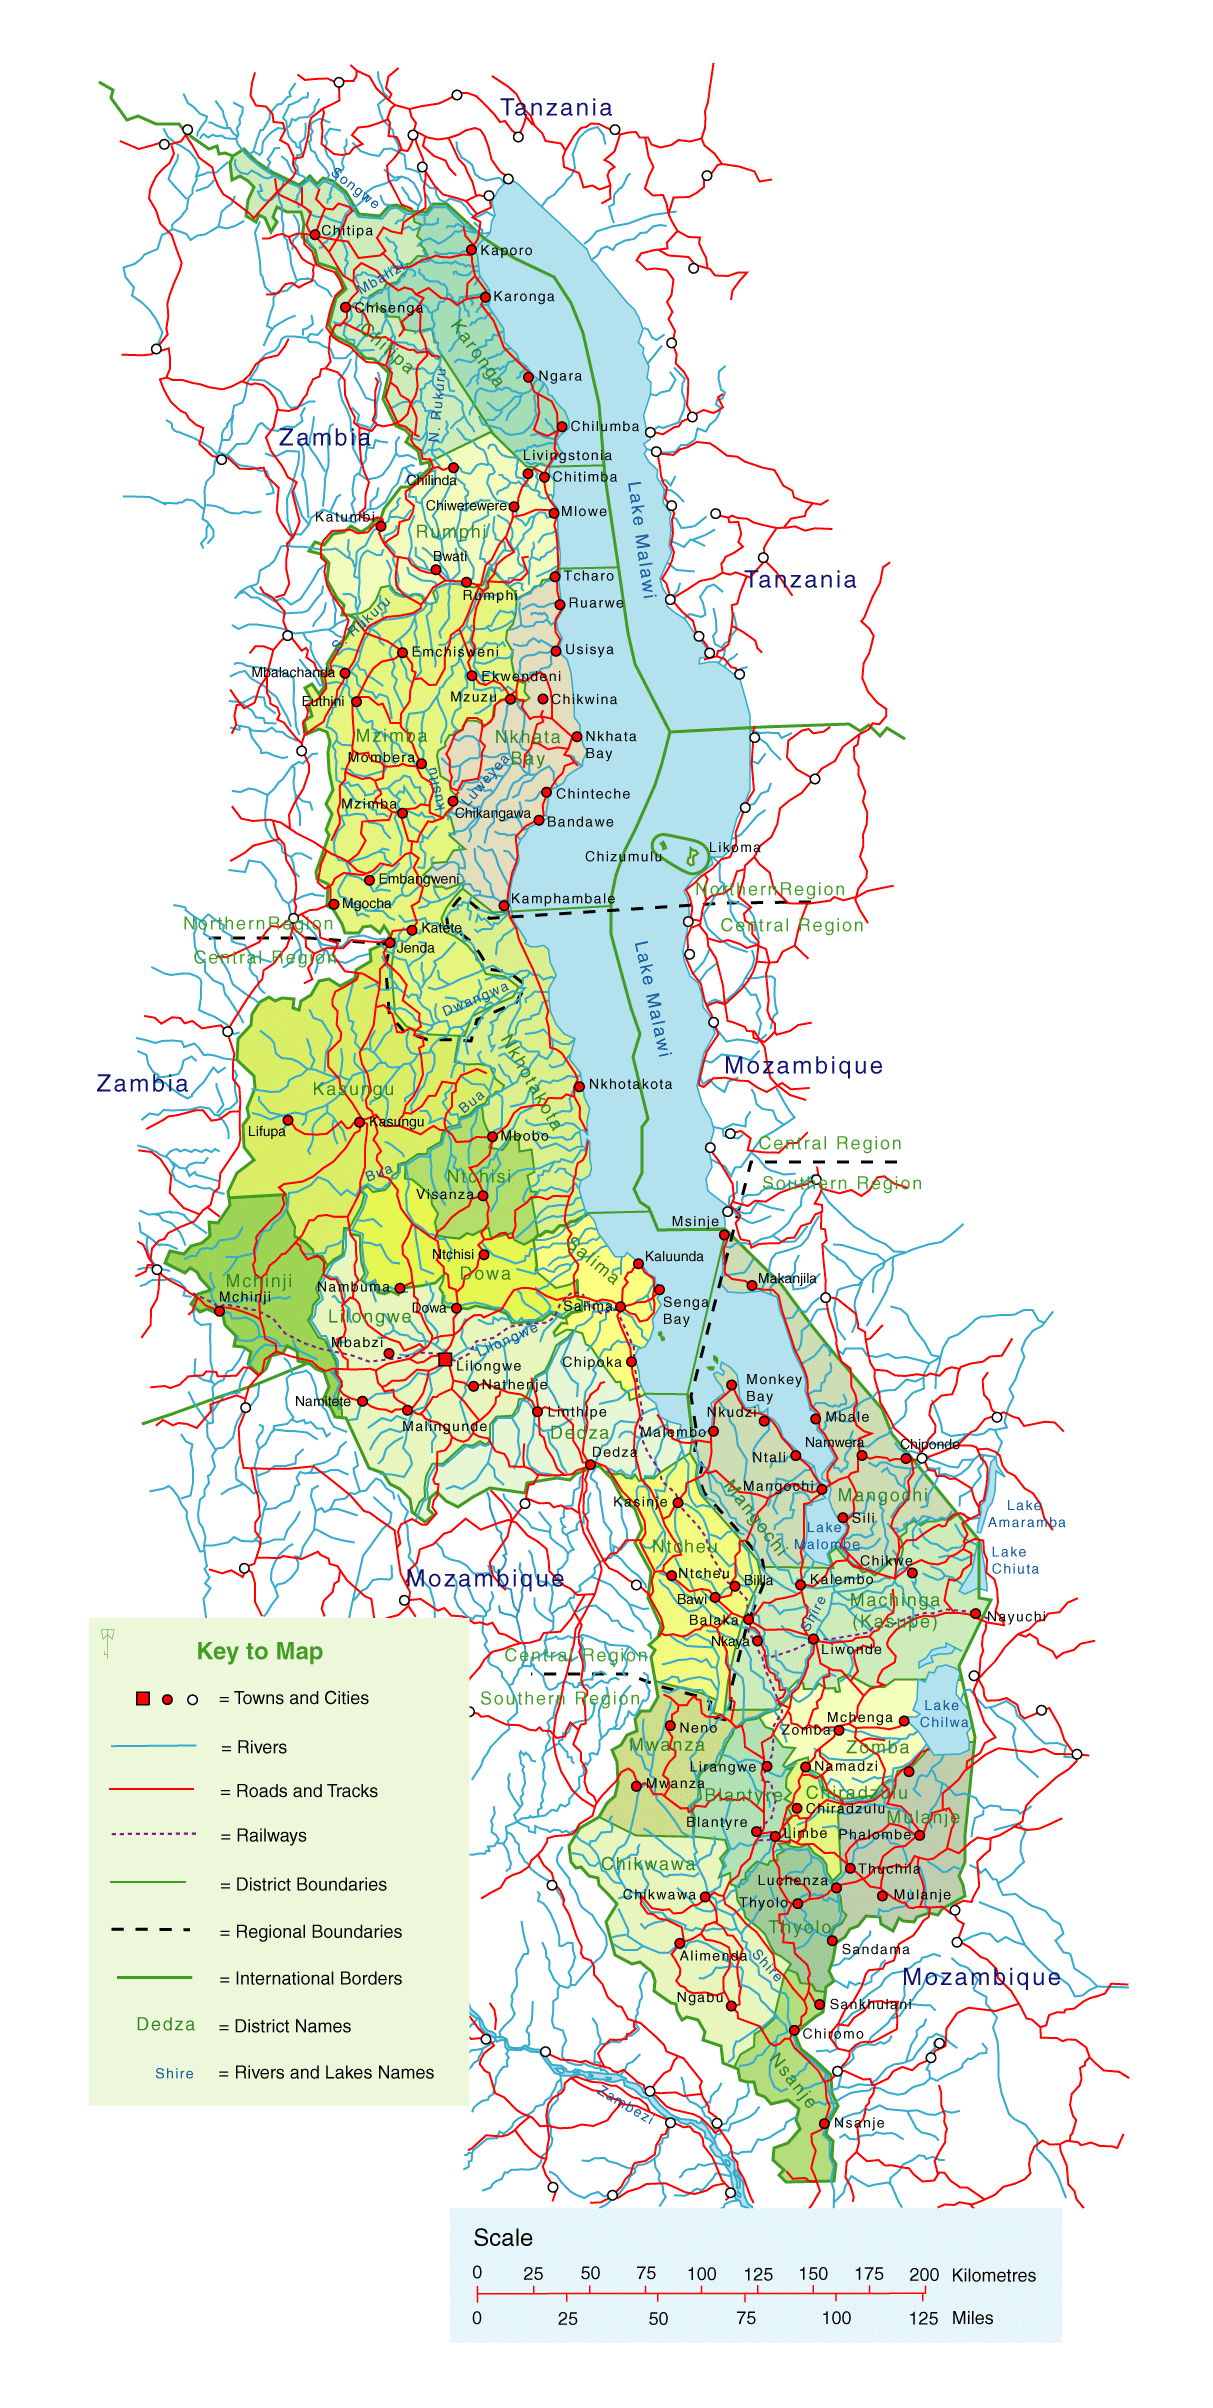 Malawi Overview Map